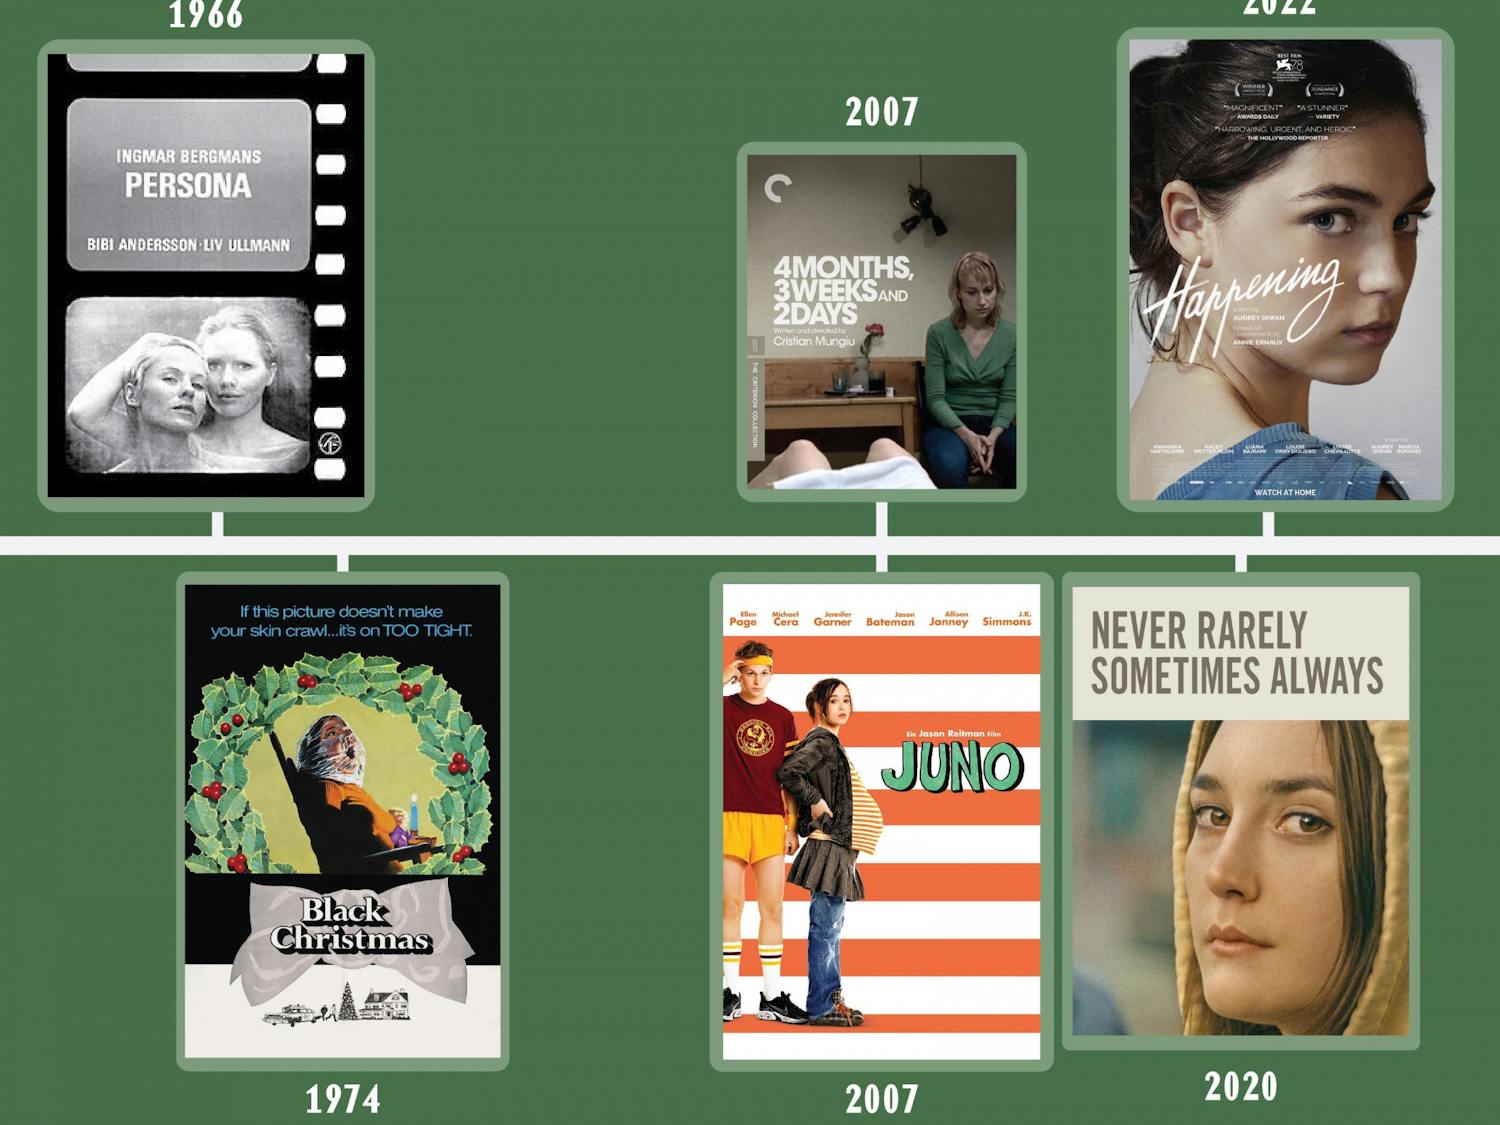 A timeline showing a number of movies with mentions of abortions and unplanned pregnancies across the years.